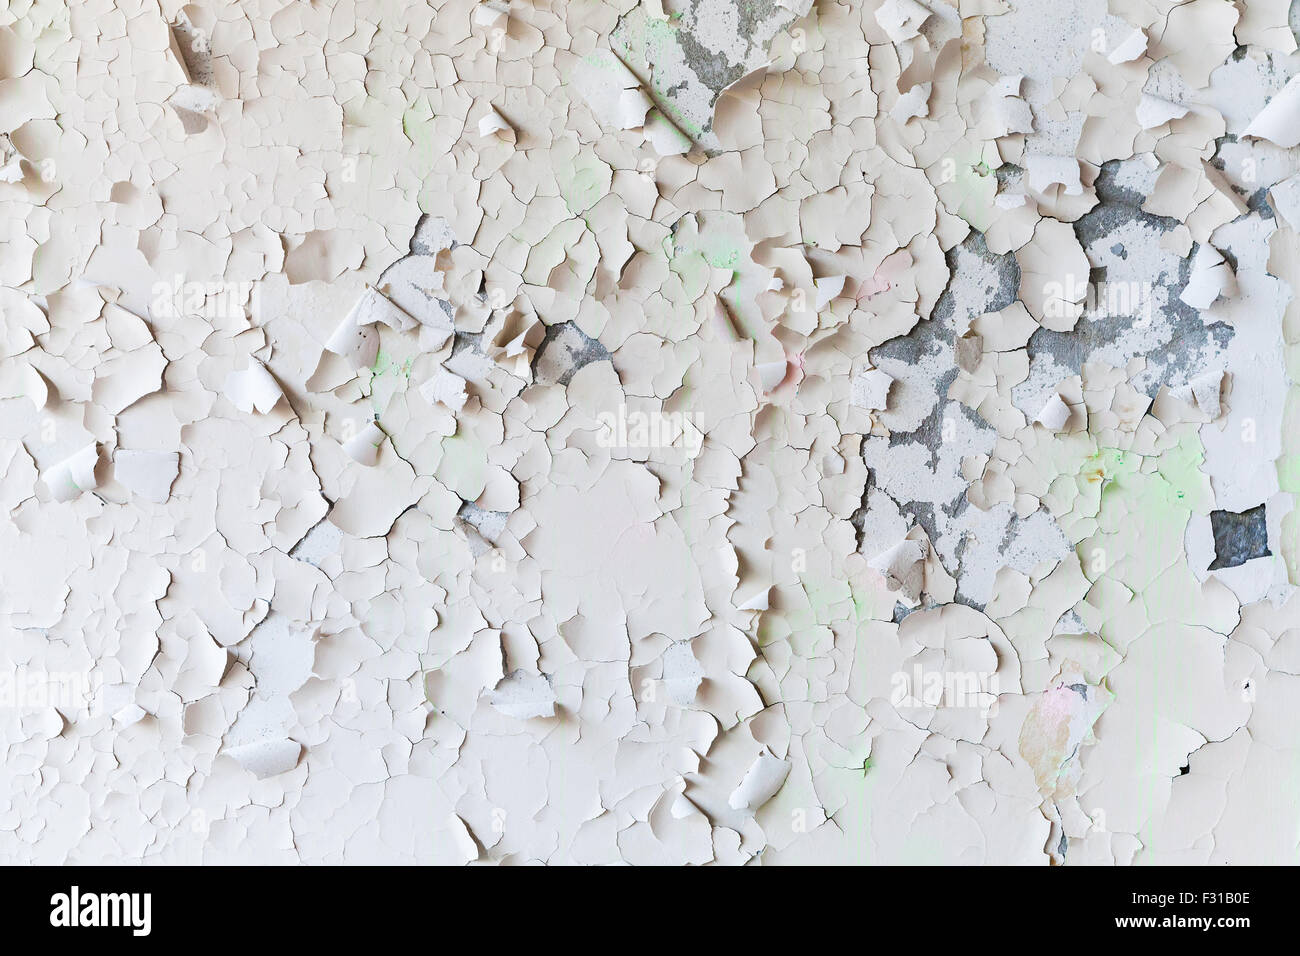 Cracked flaking paint on the wall, background texture Stock Photo